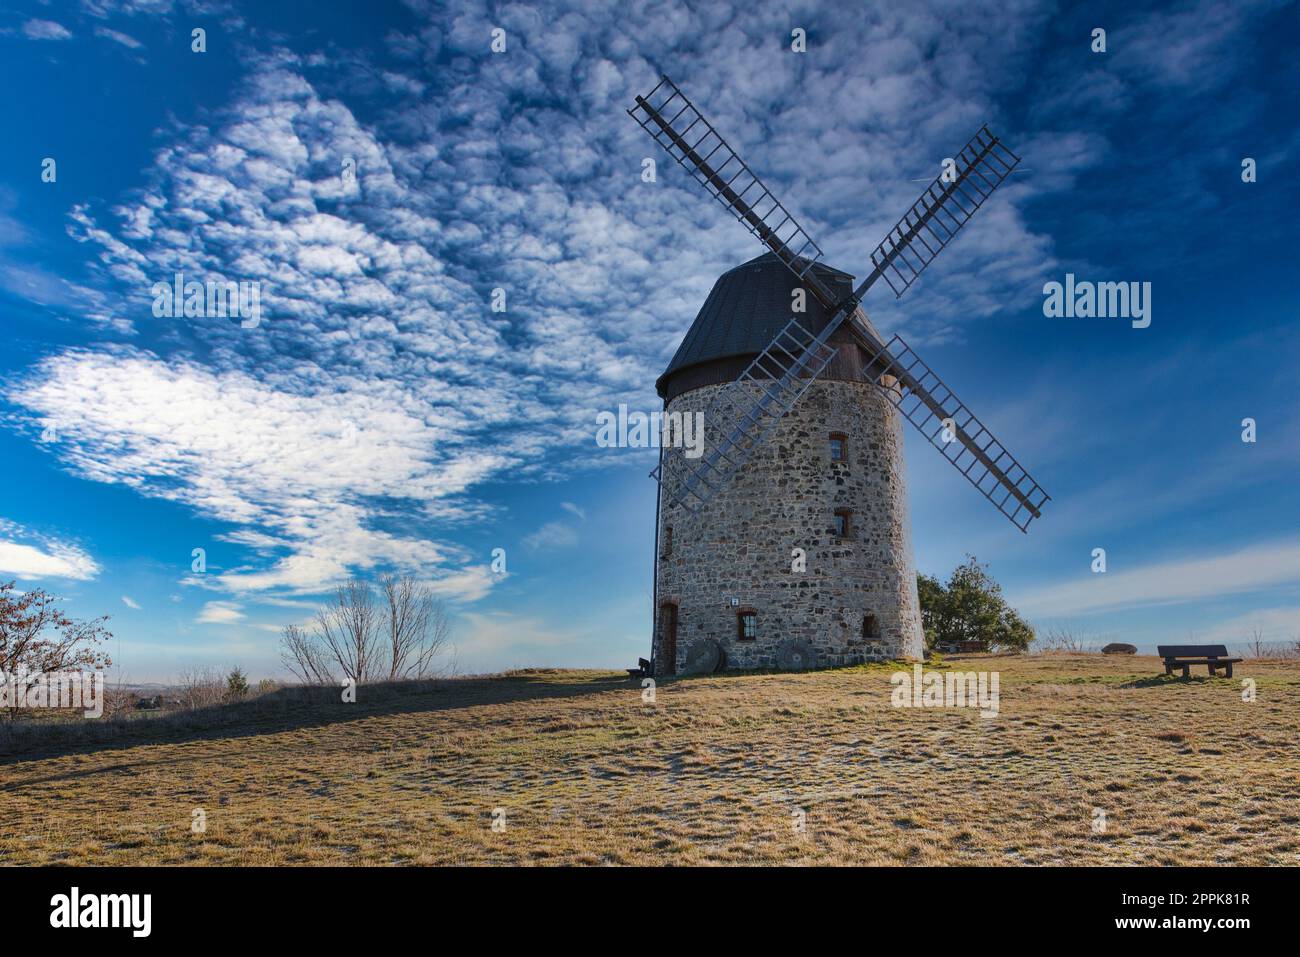 Windmill in the field in the daytime. Stock Photo